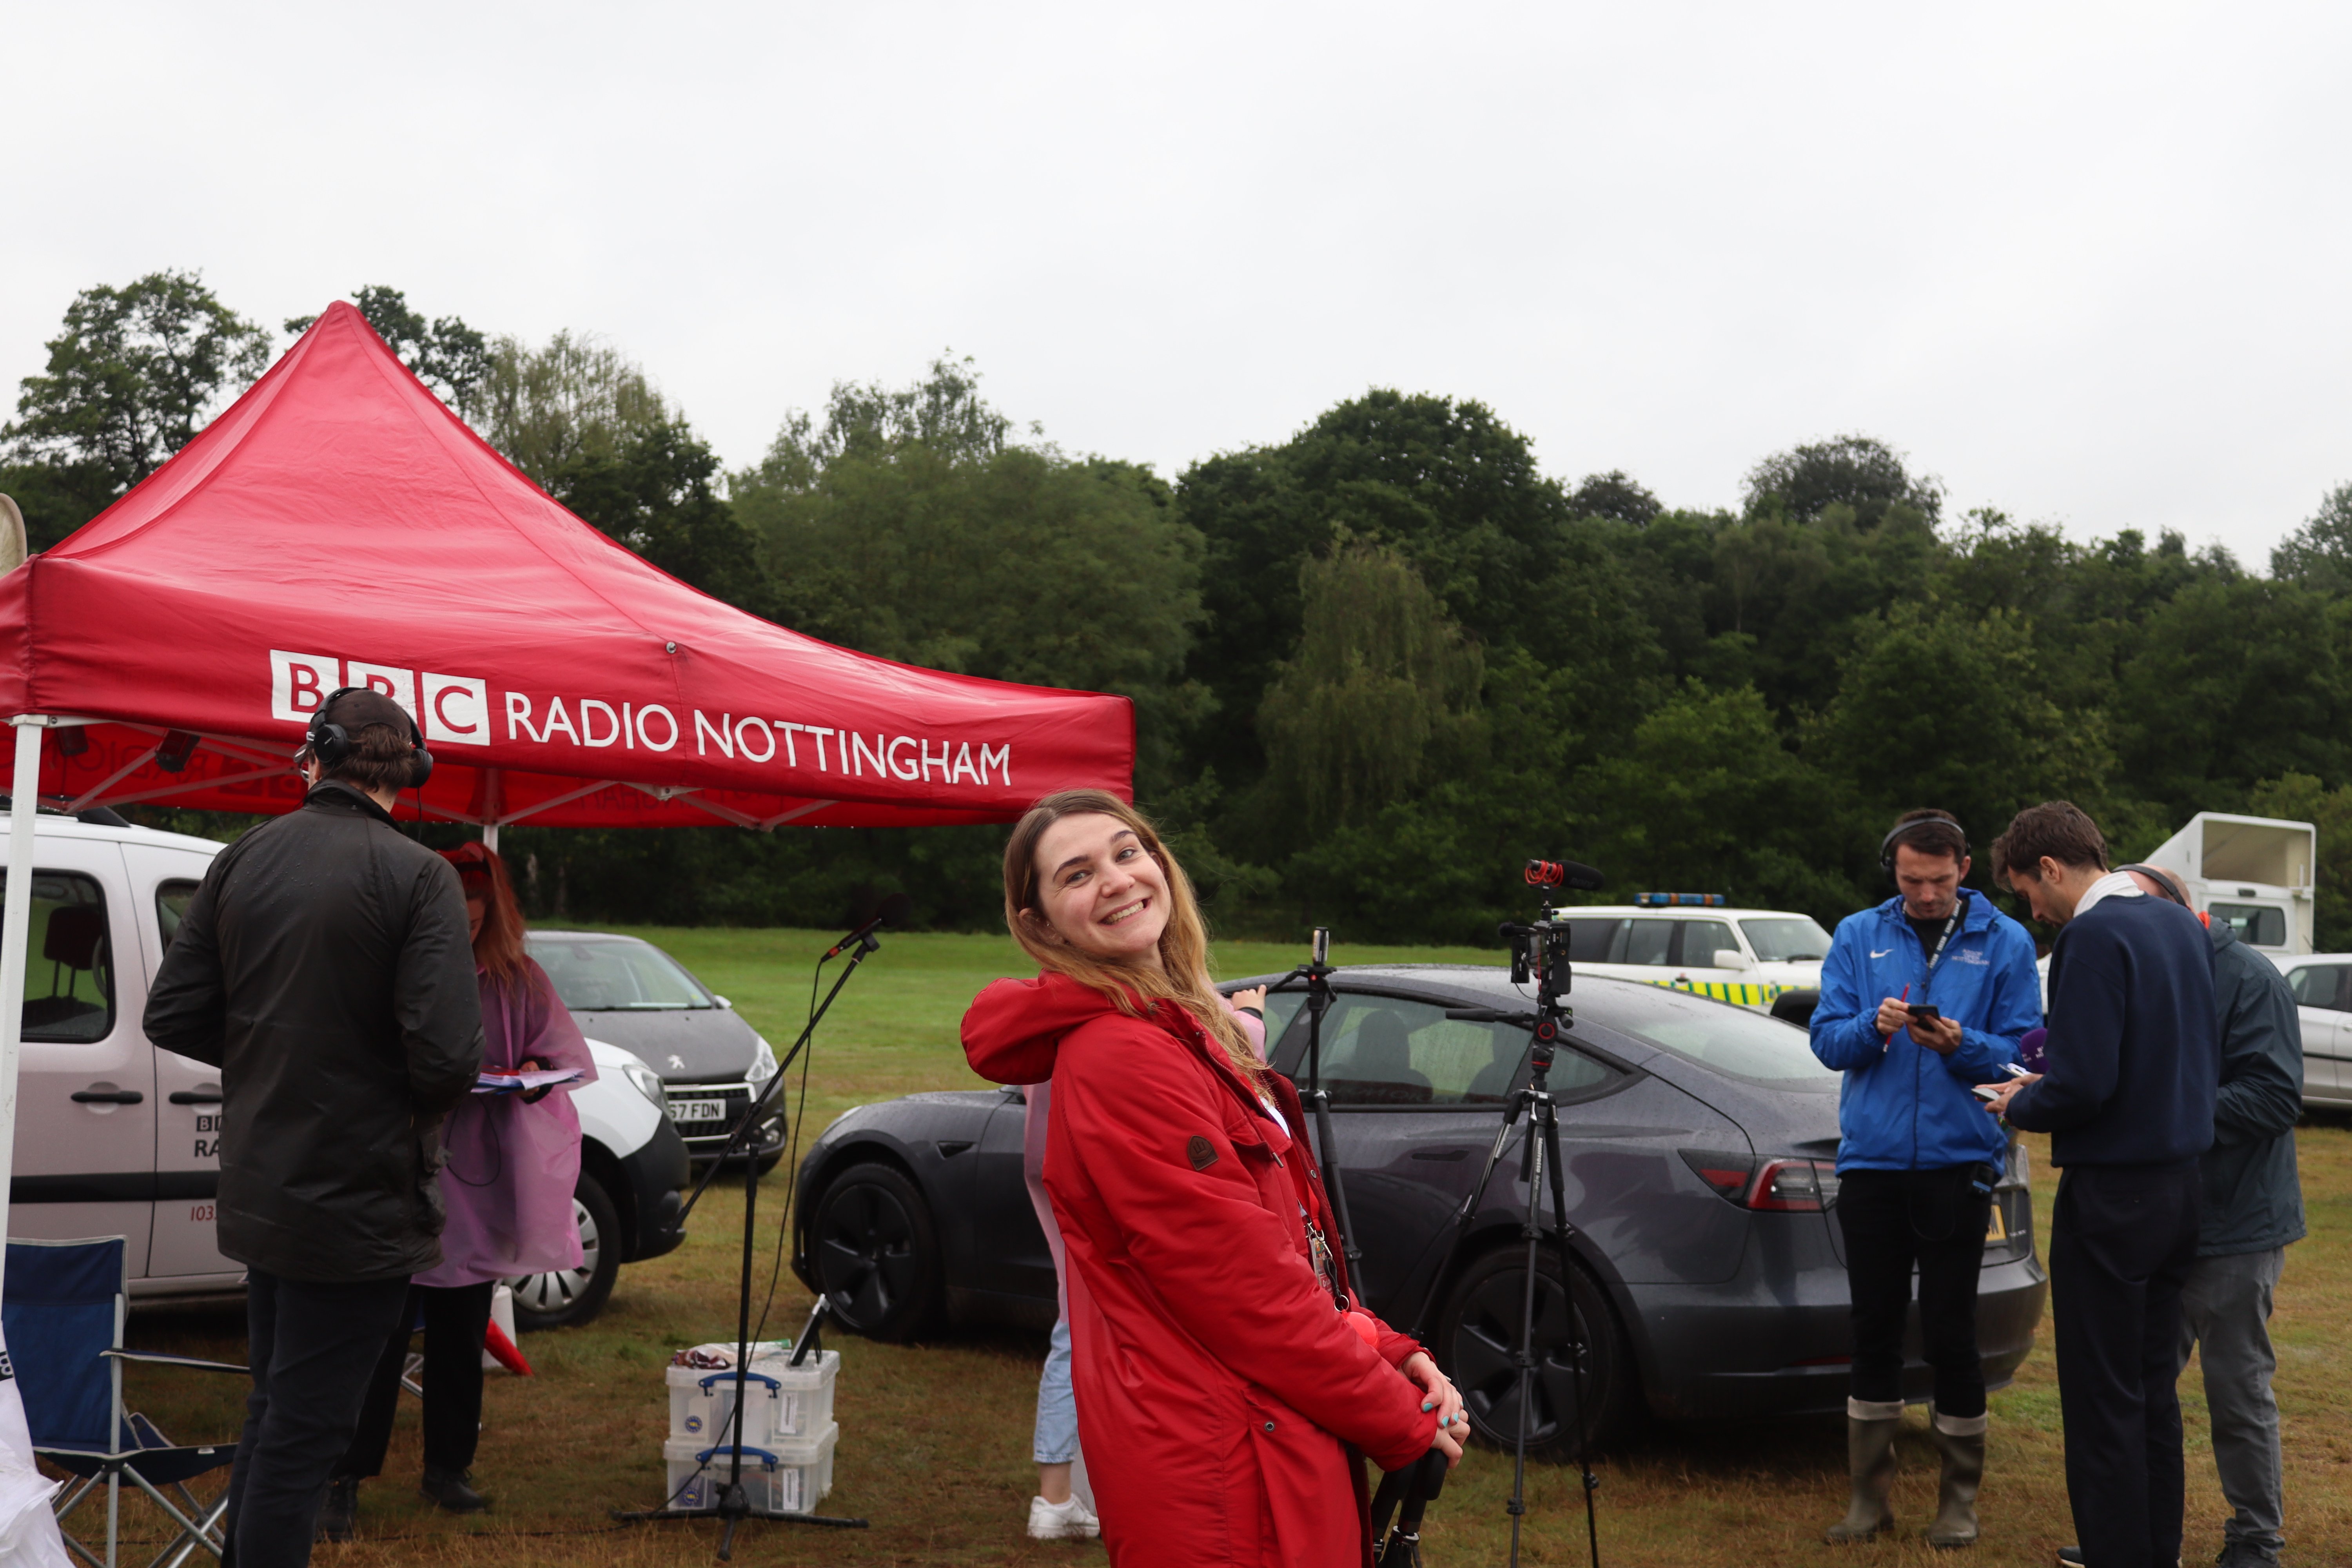 Carly sorting interviews between The Vaccines and BBC Nottingham outdoors